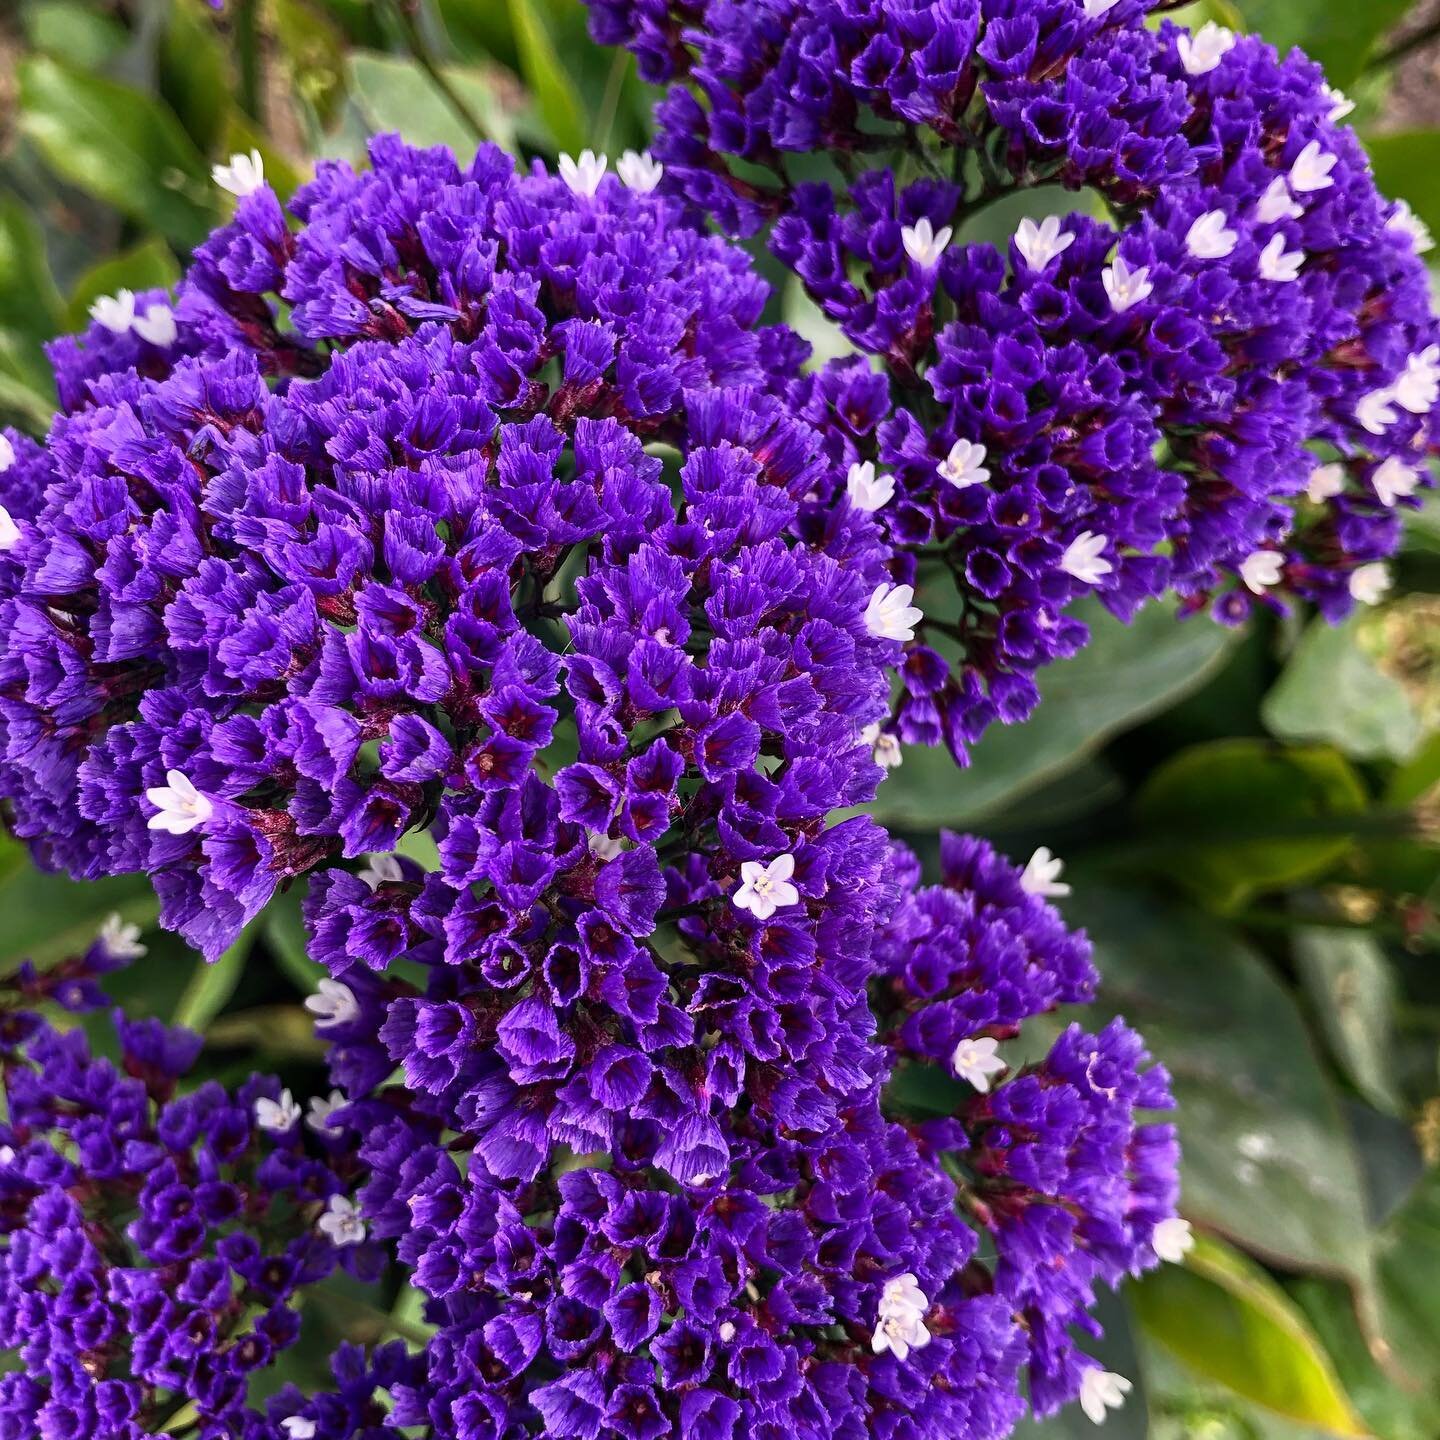 Perez&rsquo;s Sea Lavender (Limonium perezii)

While native to the Canary Islands, this bright flower is often cultivated for gardens and is naturalized in California, generally south of Point Conception, where it can be abundant on coasts and roadsi